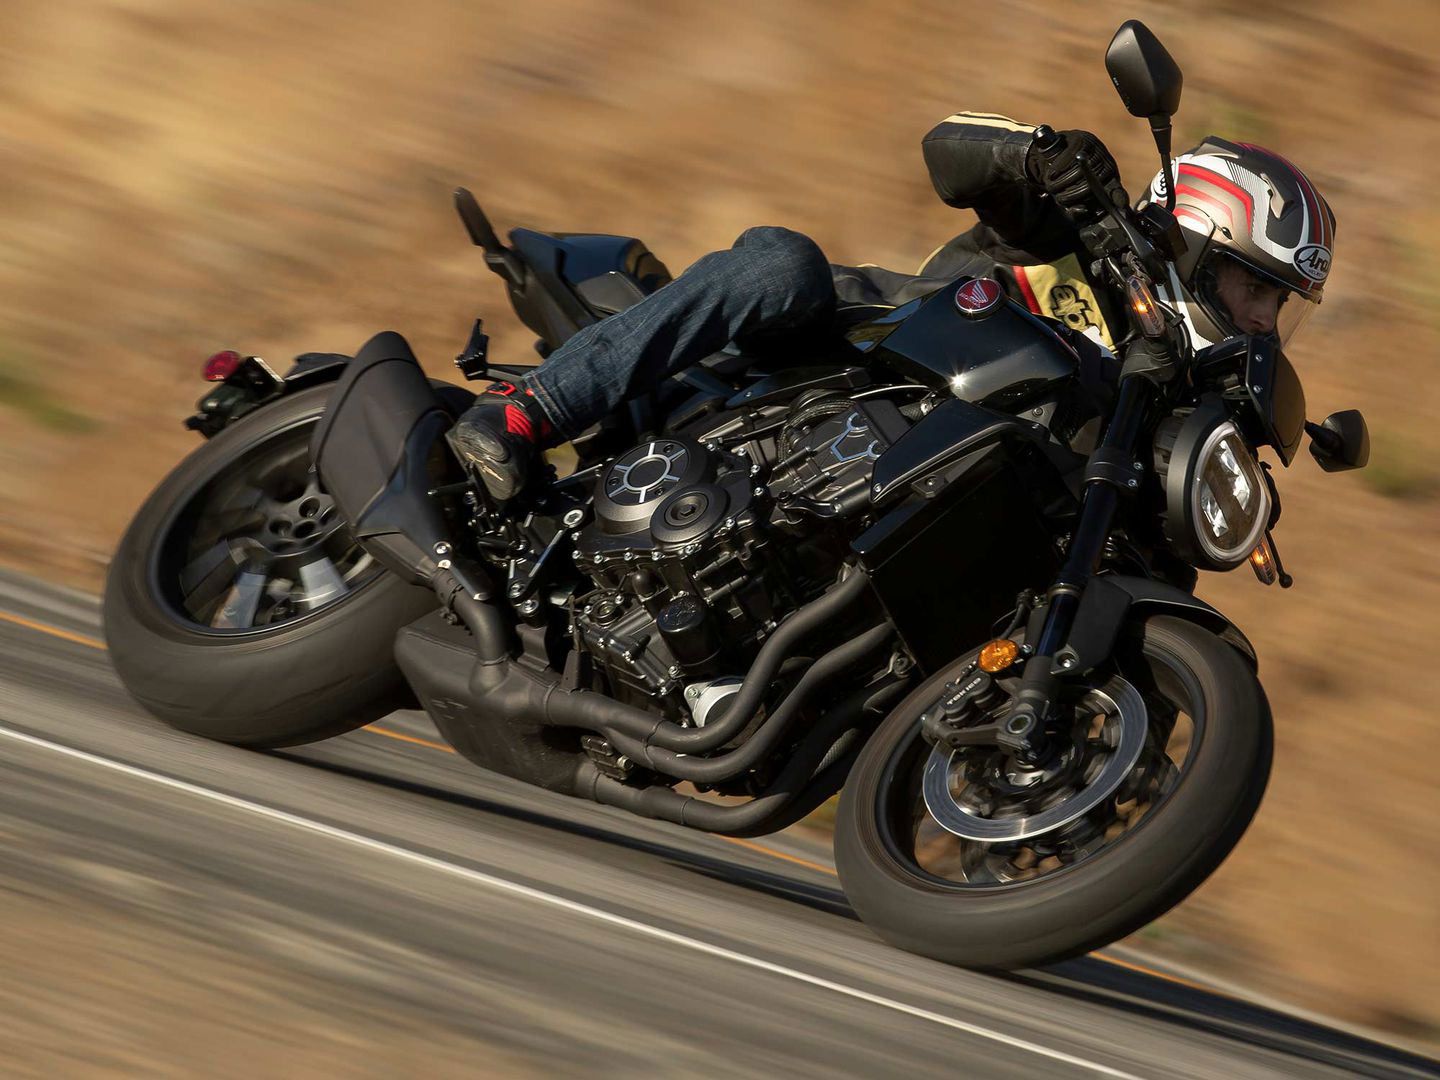 The CB1000R is a machine that simply goes where you want, without either twitchiness or less-than-responsive steering.